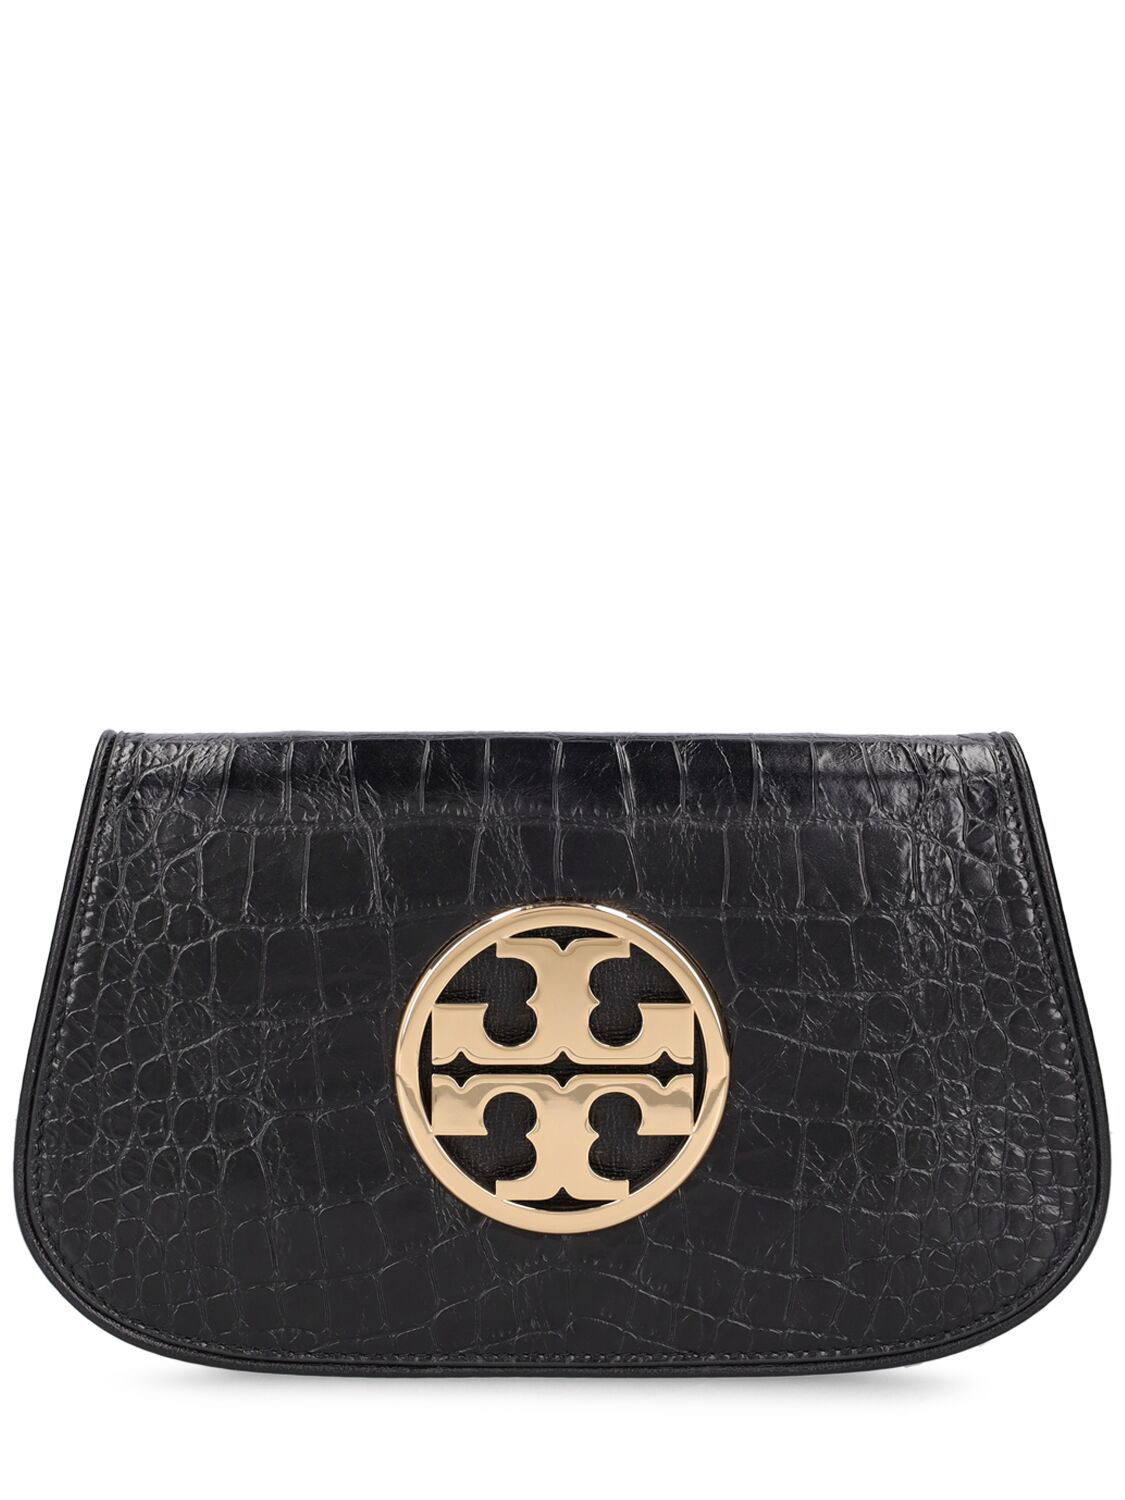 Tory Burch Reva Embossed Leather Clutch In Black